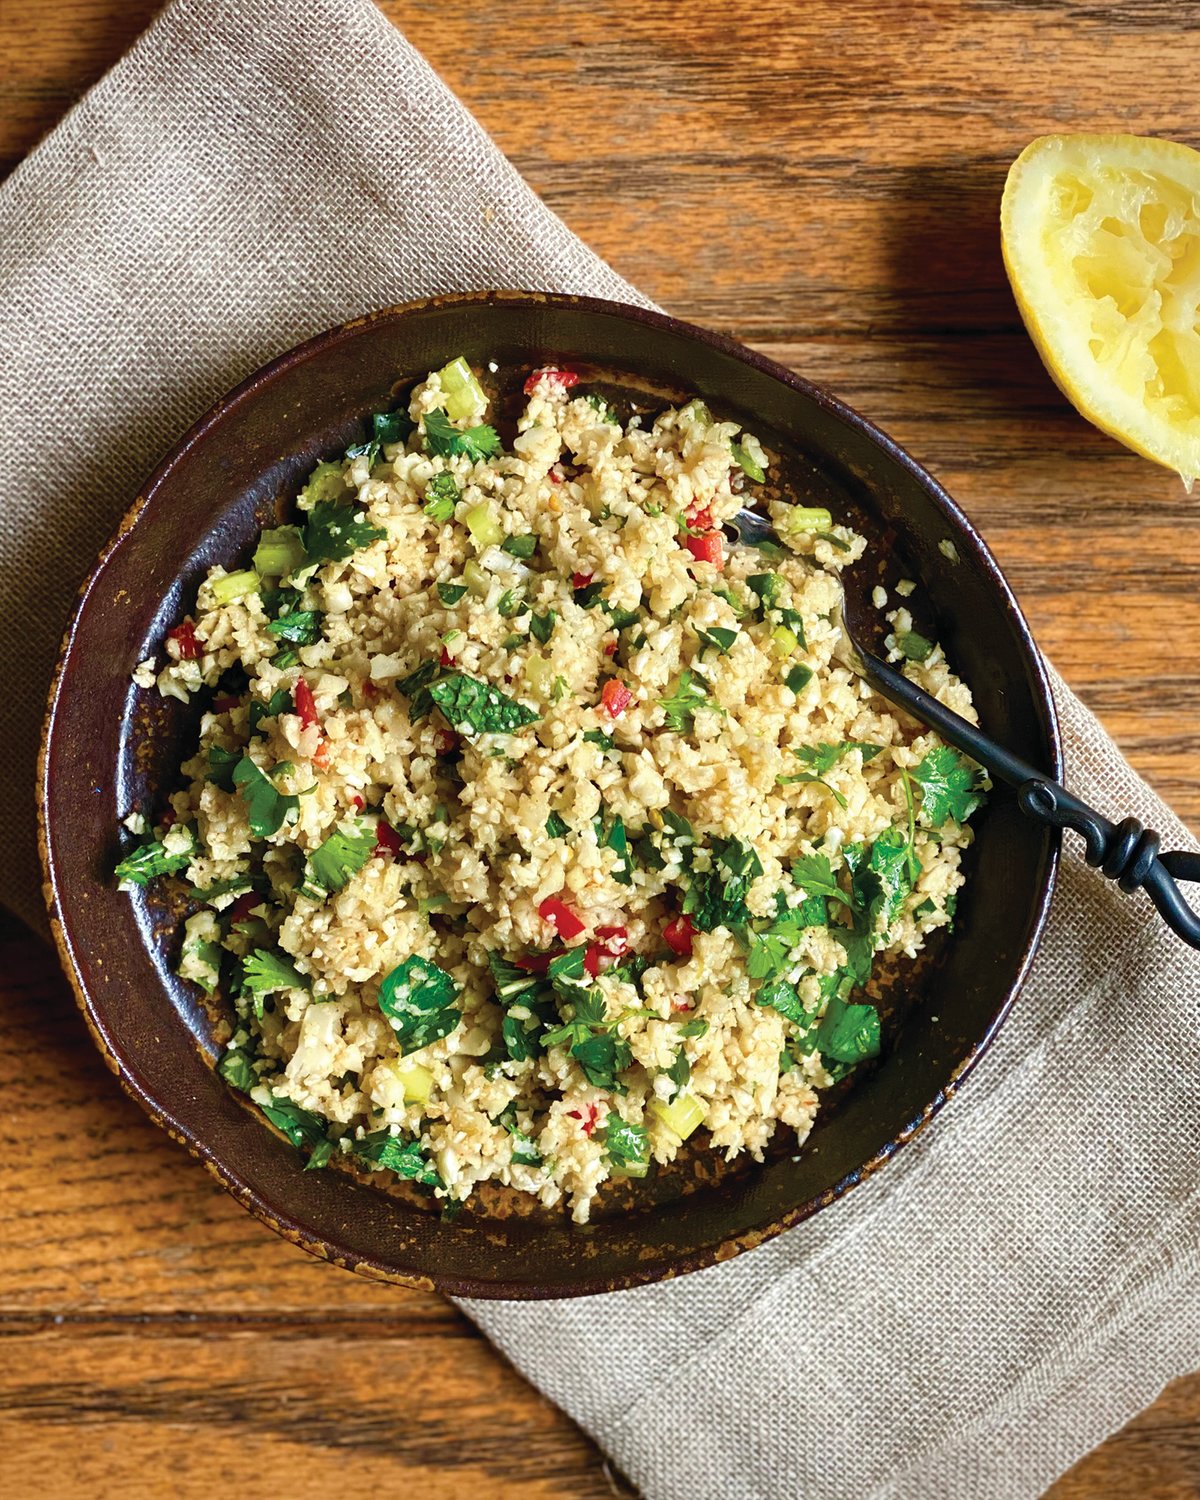 Couscous is an excellent side dish or vegetarian option that is perfect for outdoor dining.